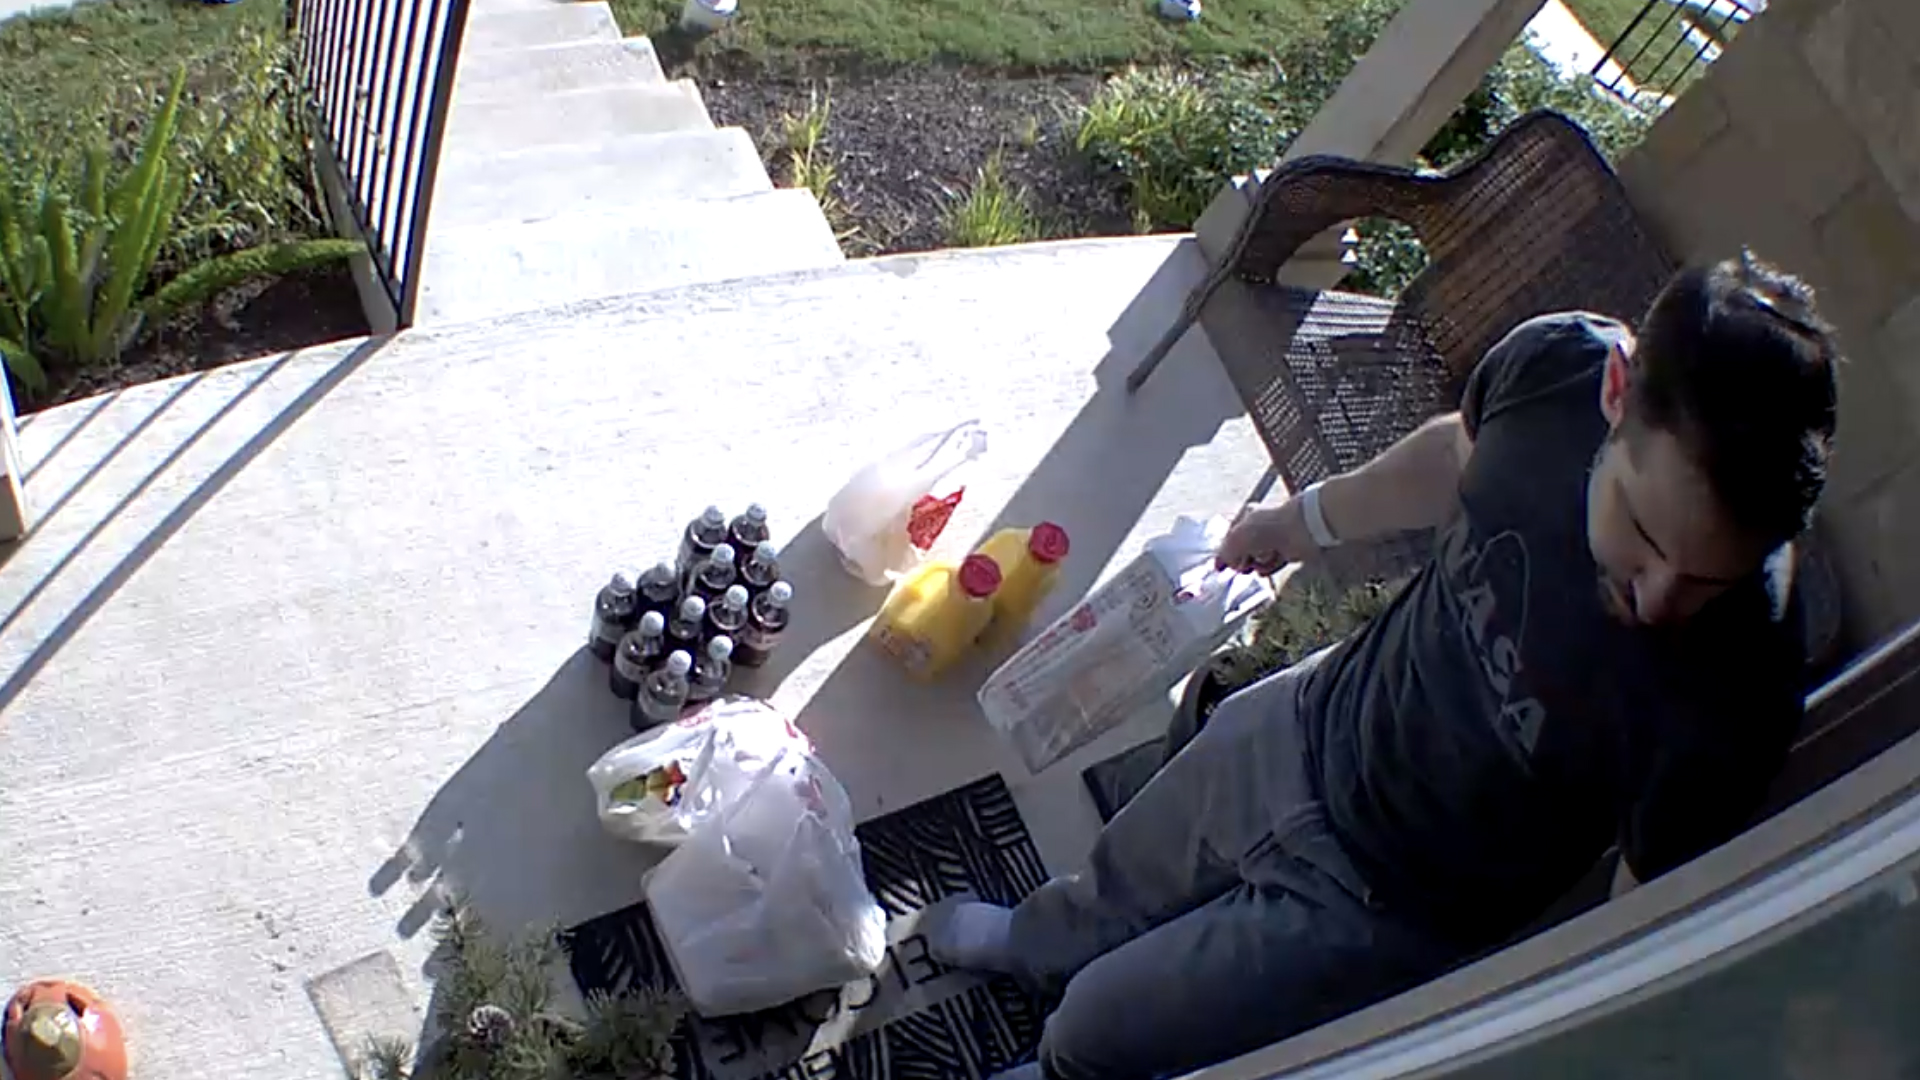 A grocery pickup on the Blink Outdoor's live feed.